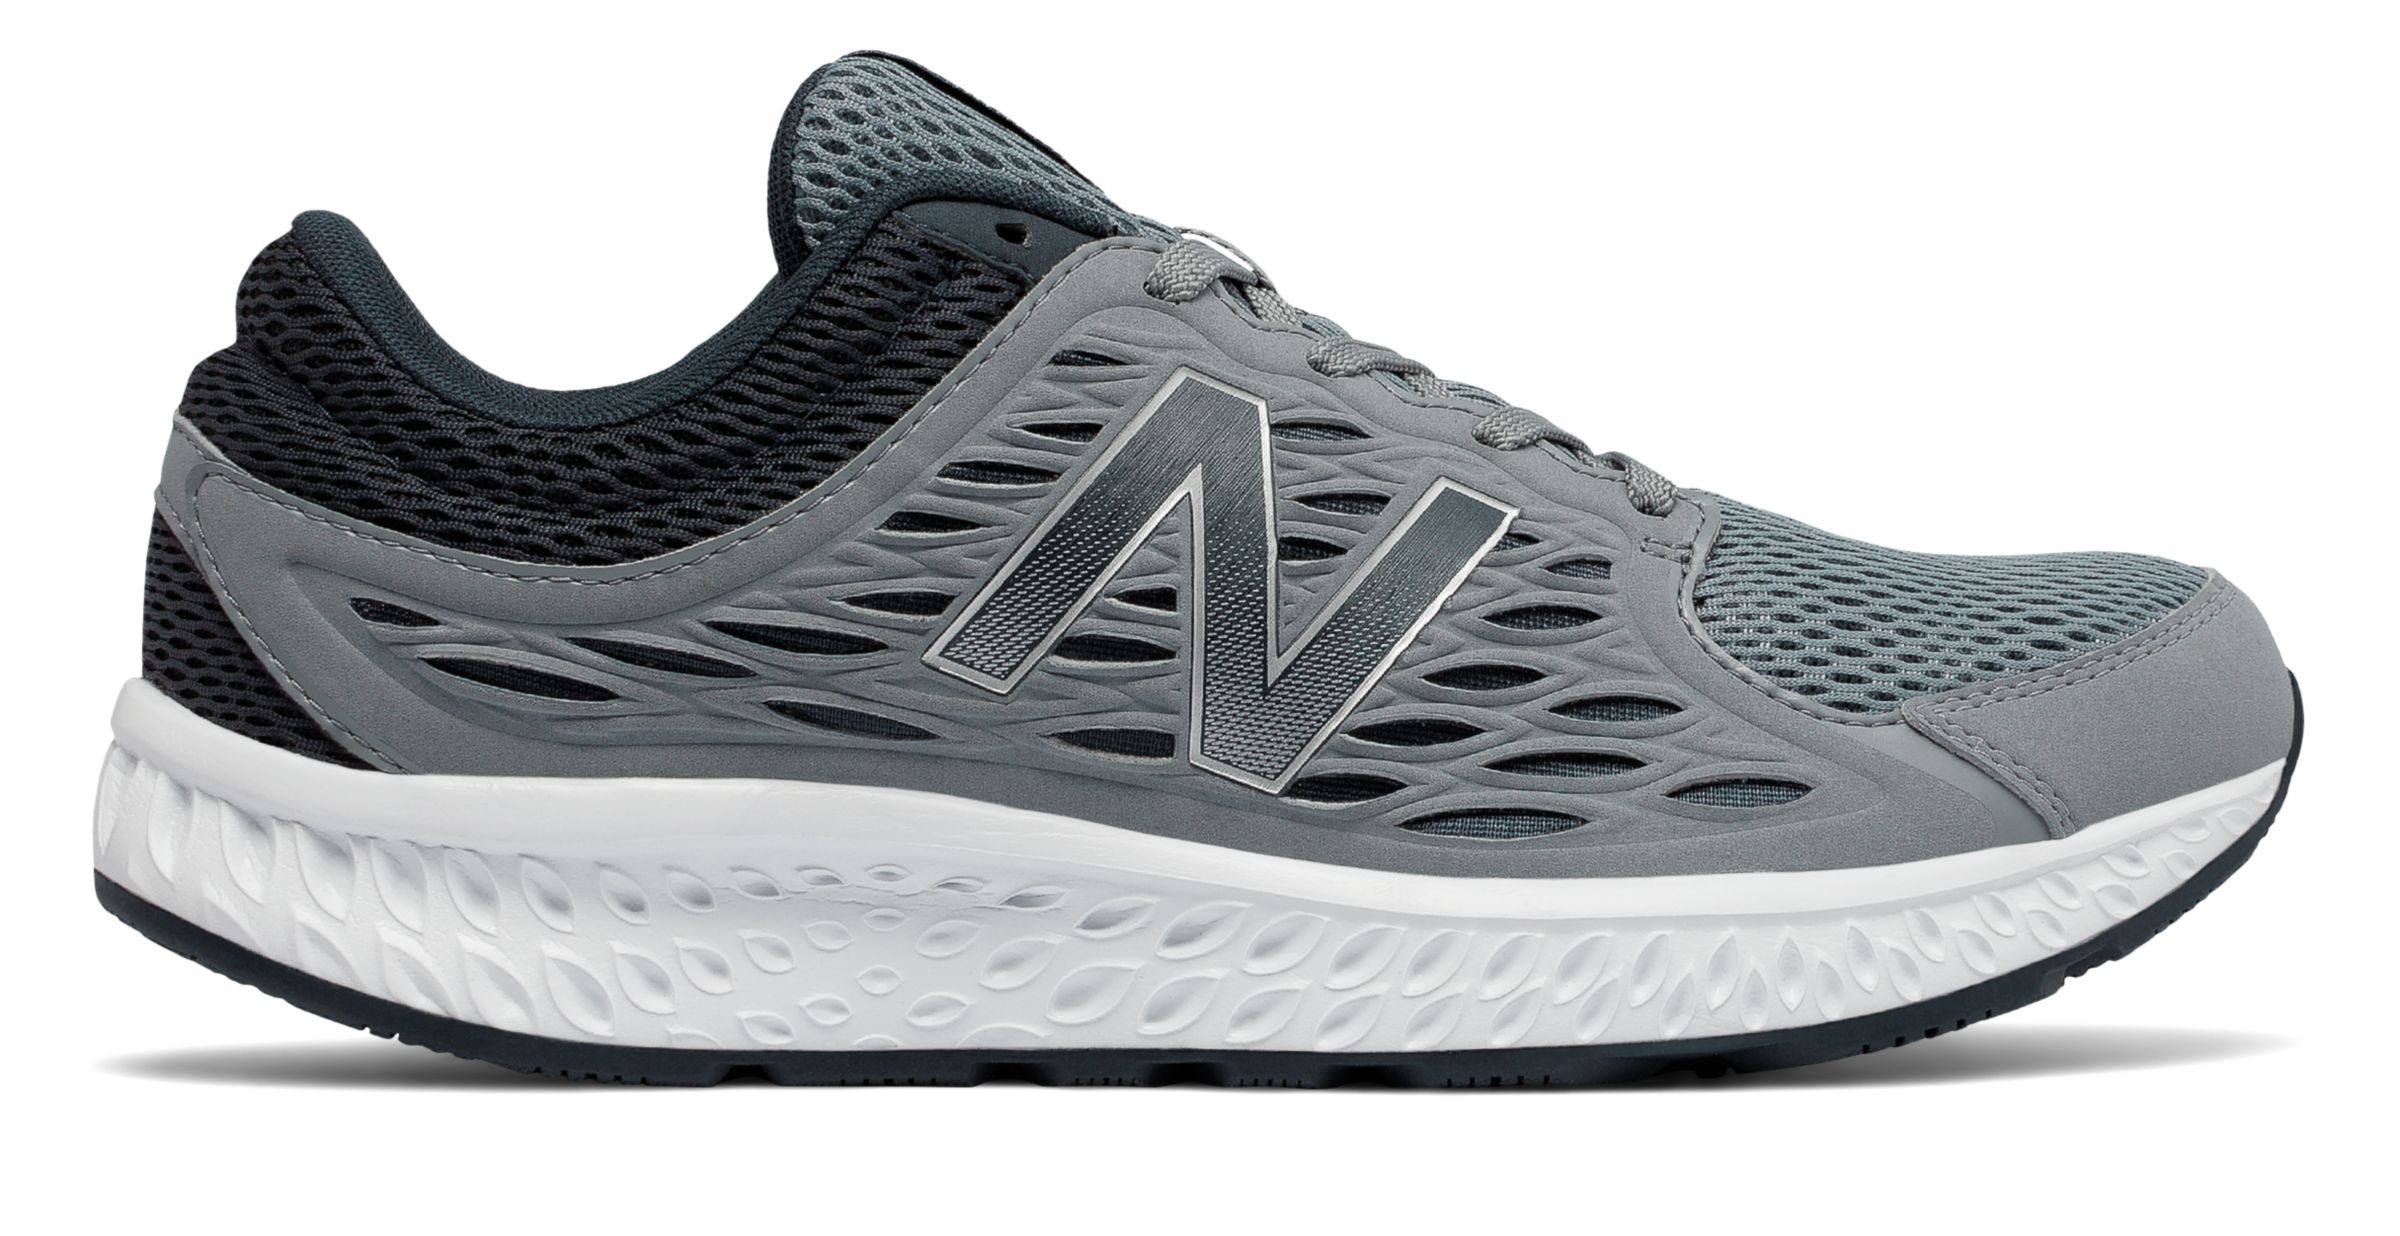 New Balance M420-V3 on Sale - Discounts Up to 20% Off on M420LS3 at Joe's New  Balance Outlet